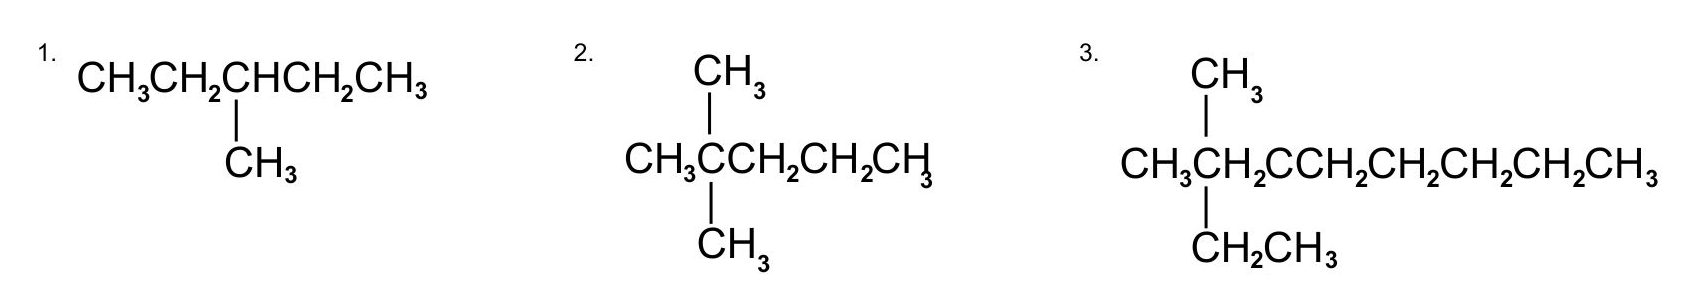 There are 3 chemical structures. From left to right: a 5 carbon chain with a methyl group at the 3rd carbon; a 5 carbon chain with two methyl groups at the 2nd carbon; and lastly, a 9 carbon chain with two methyl groups at the 3rd carbon.